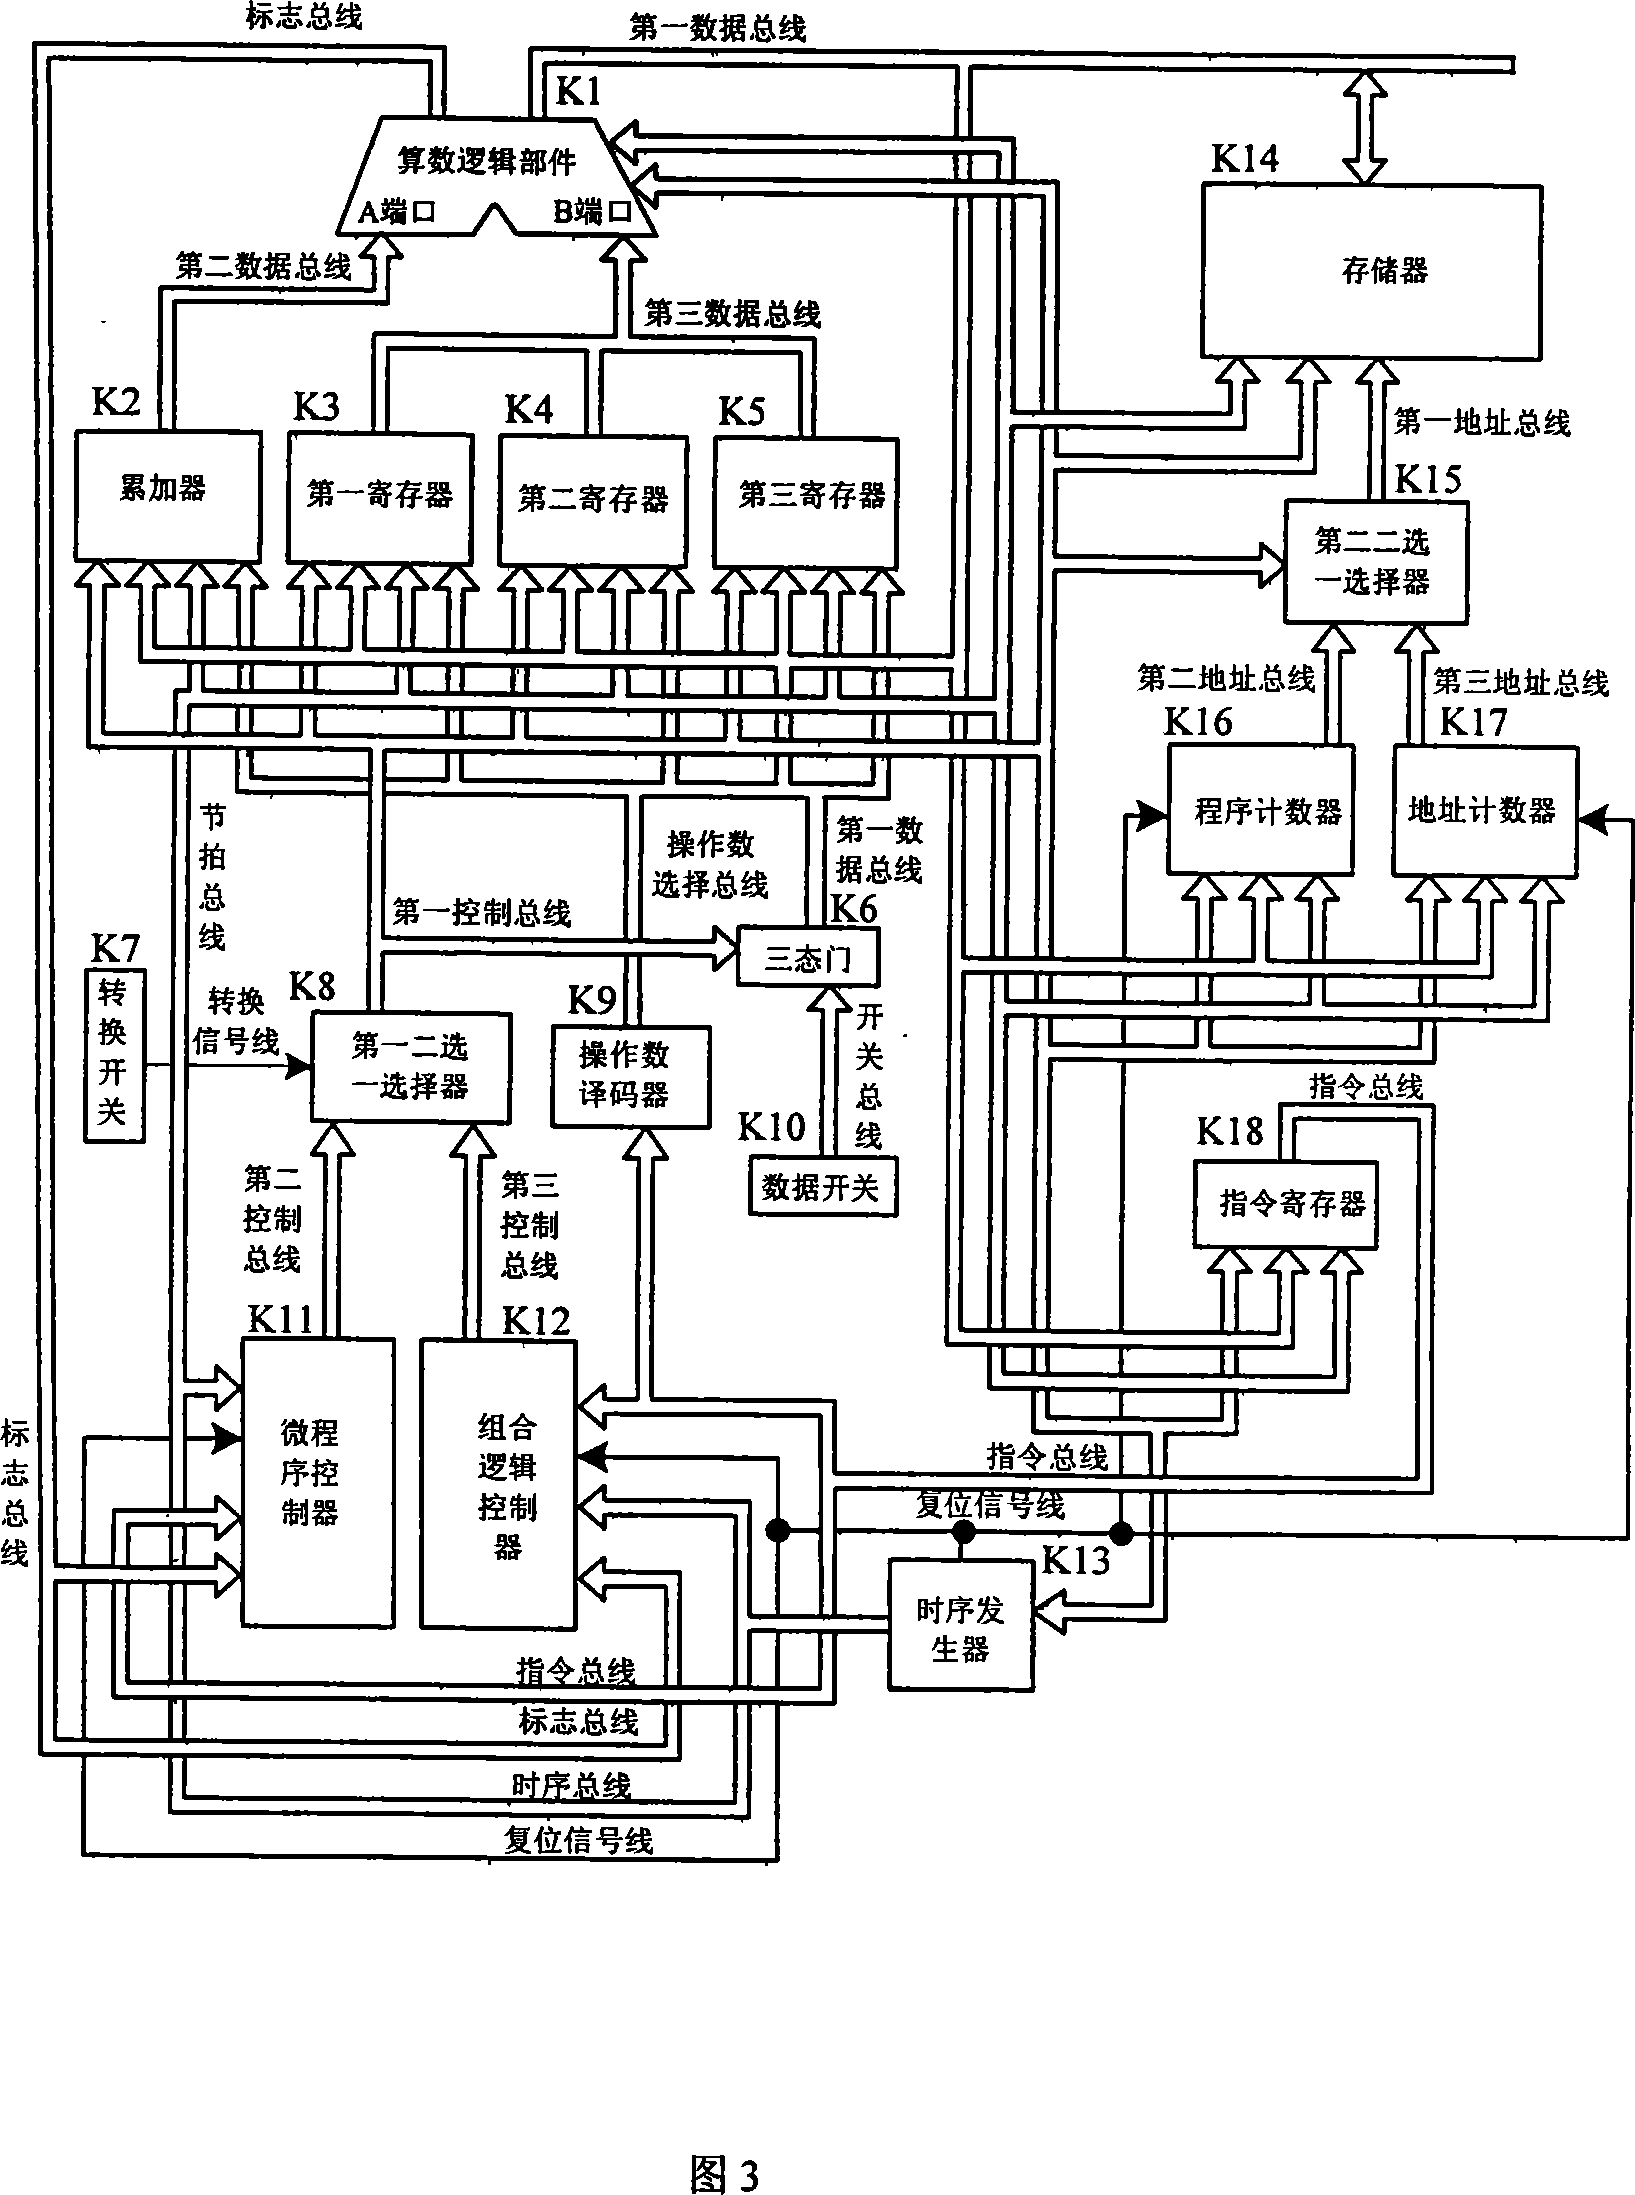 A control signal once fully-converted computer organization principle test device